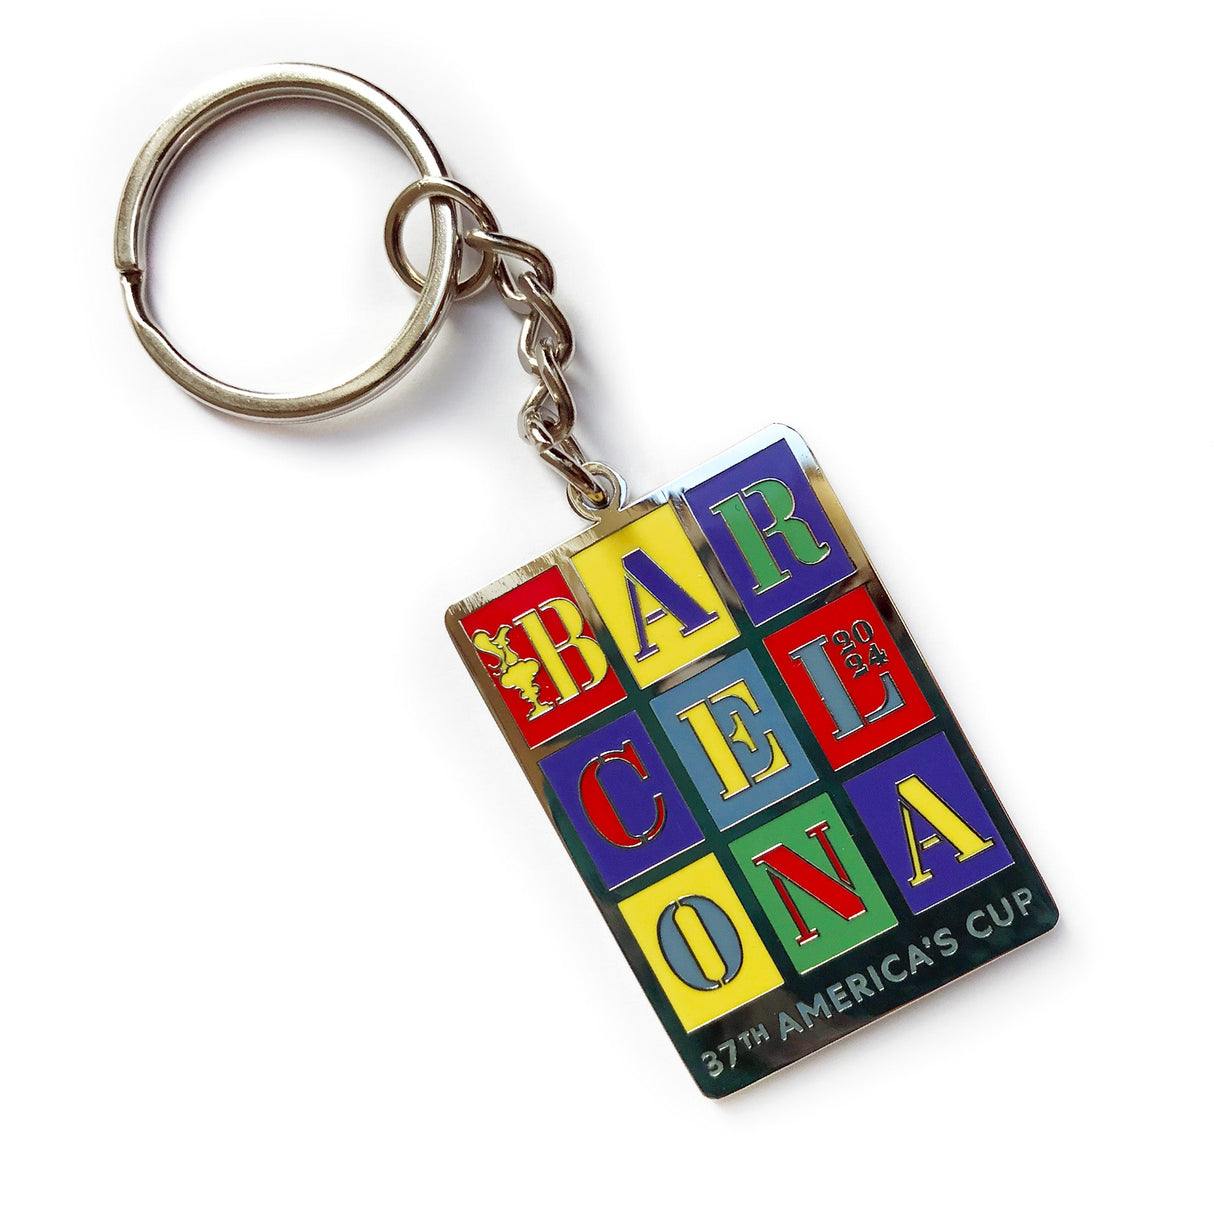 37th America's Cup Colour Keyring